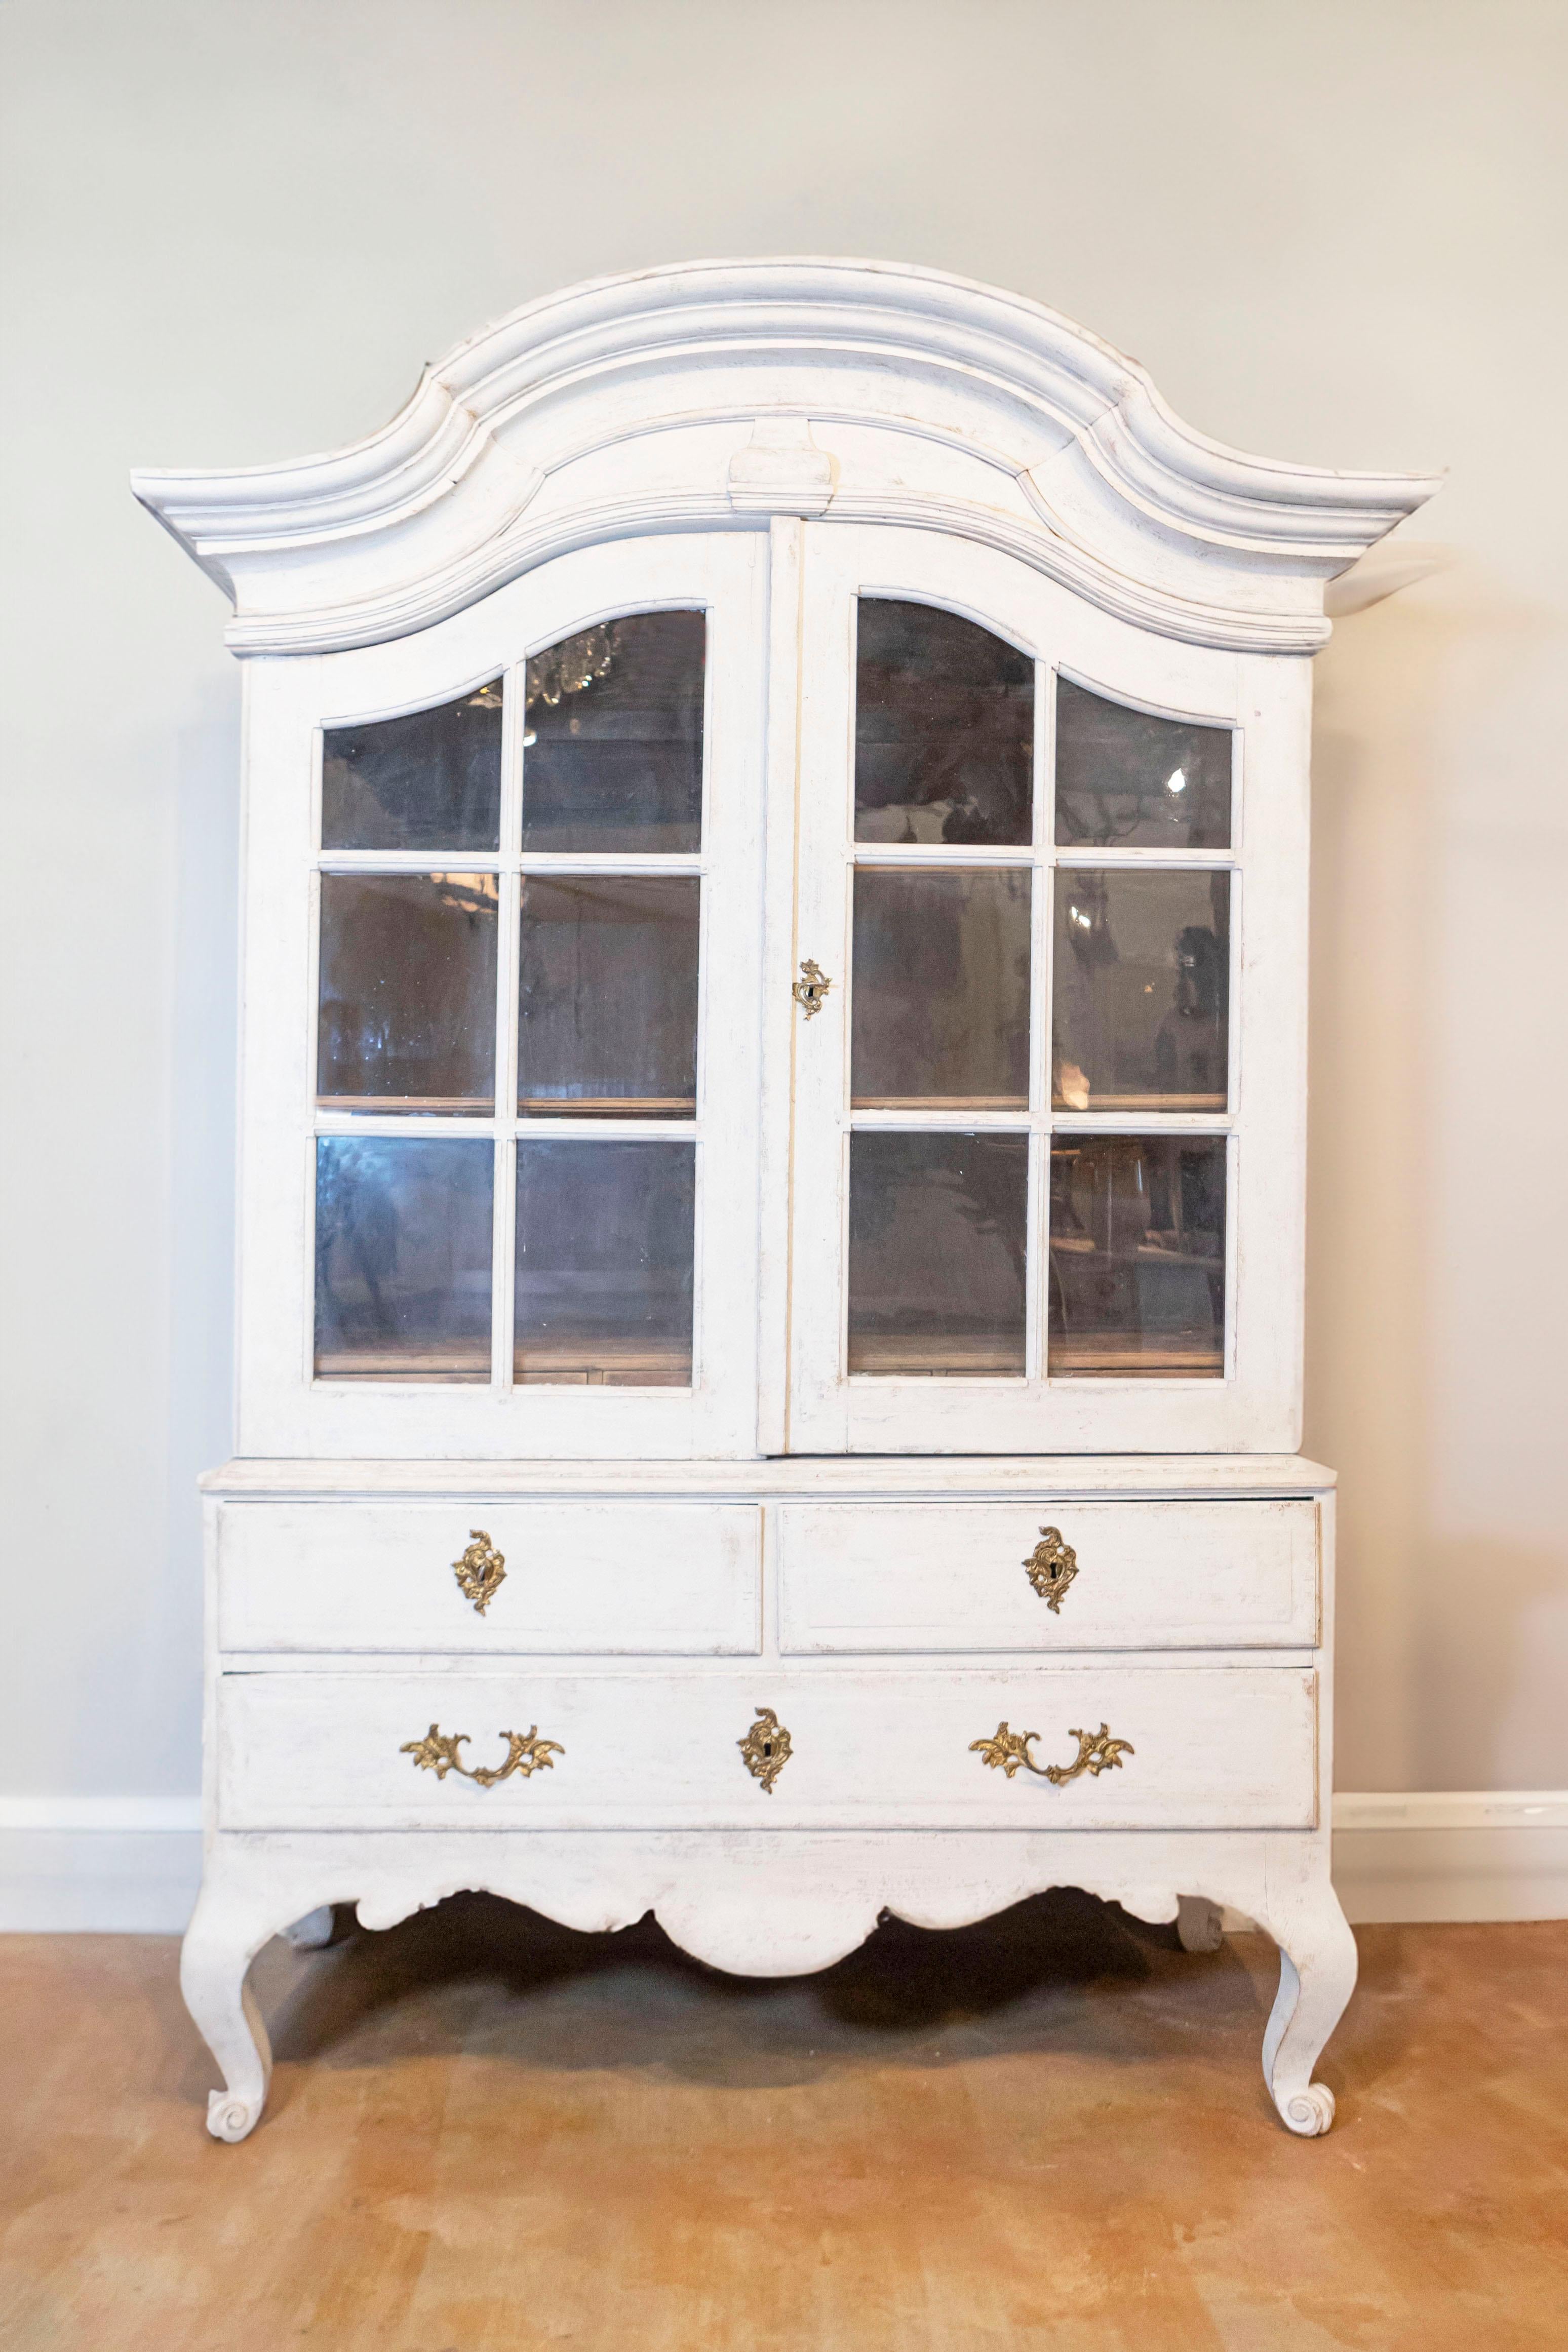 A Swedish period Rococo painted wood cabinet with bonnet-shaped pediment, glass doors, lower drawers and original hardware from the mid 18th century. Our eye is immediately attracted to the curvy molded bonnet top, beautifully crowing the confirming